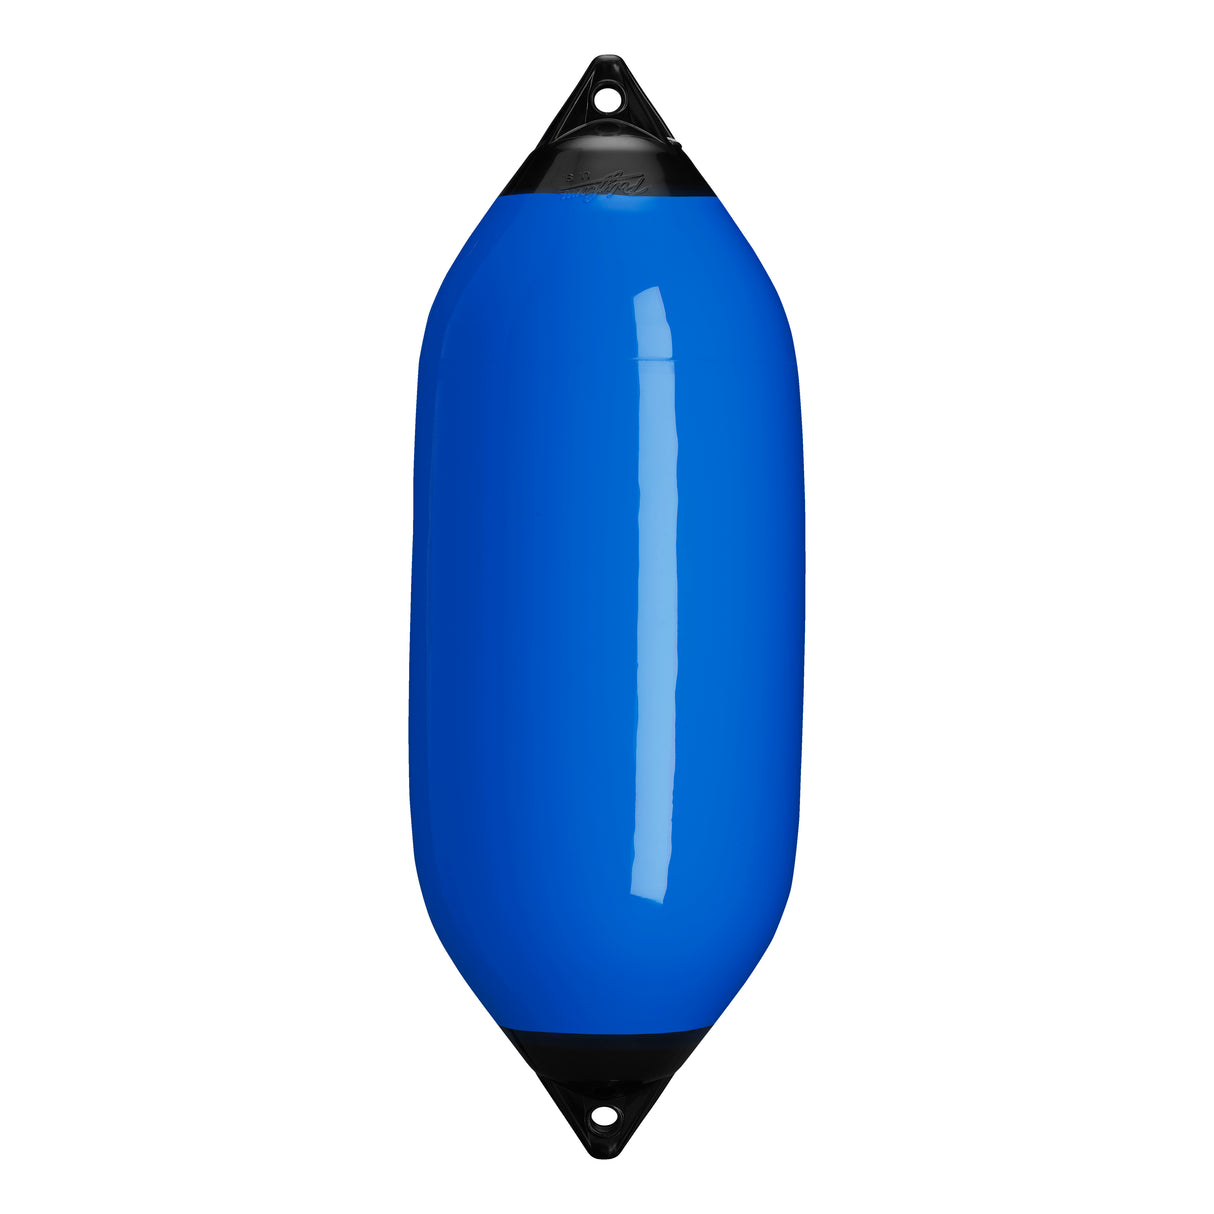 Blue boat fender with Black-Top, Polyform F-7